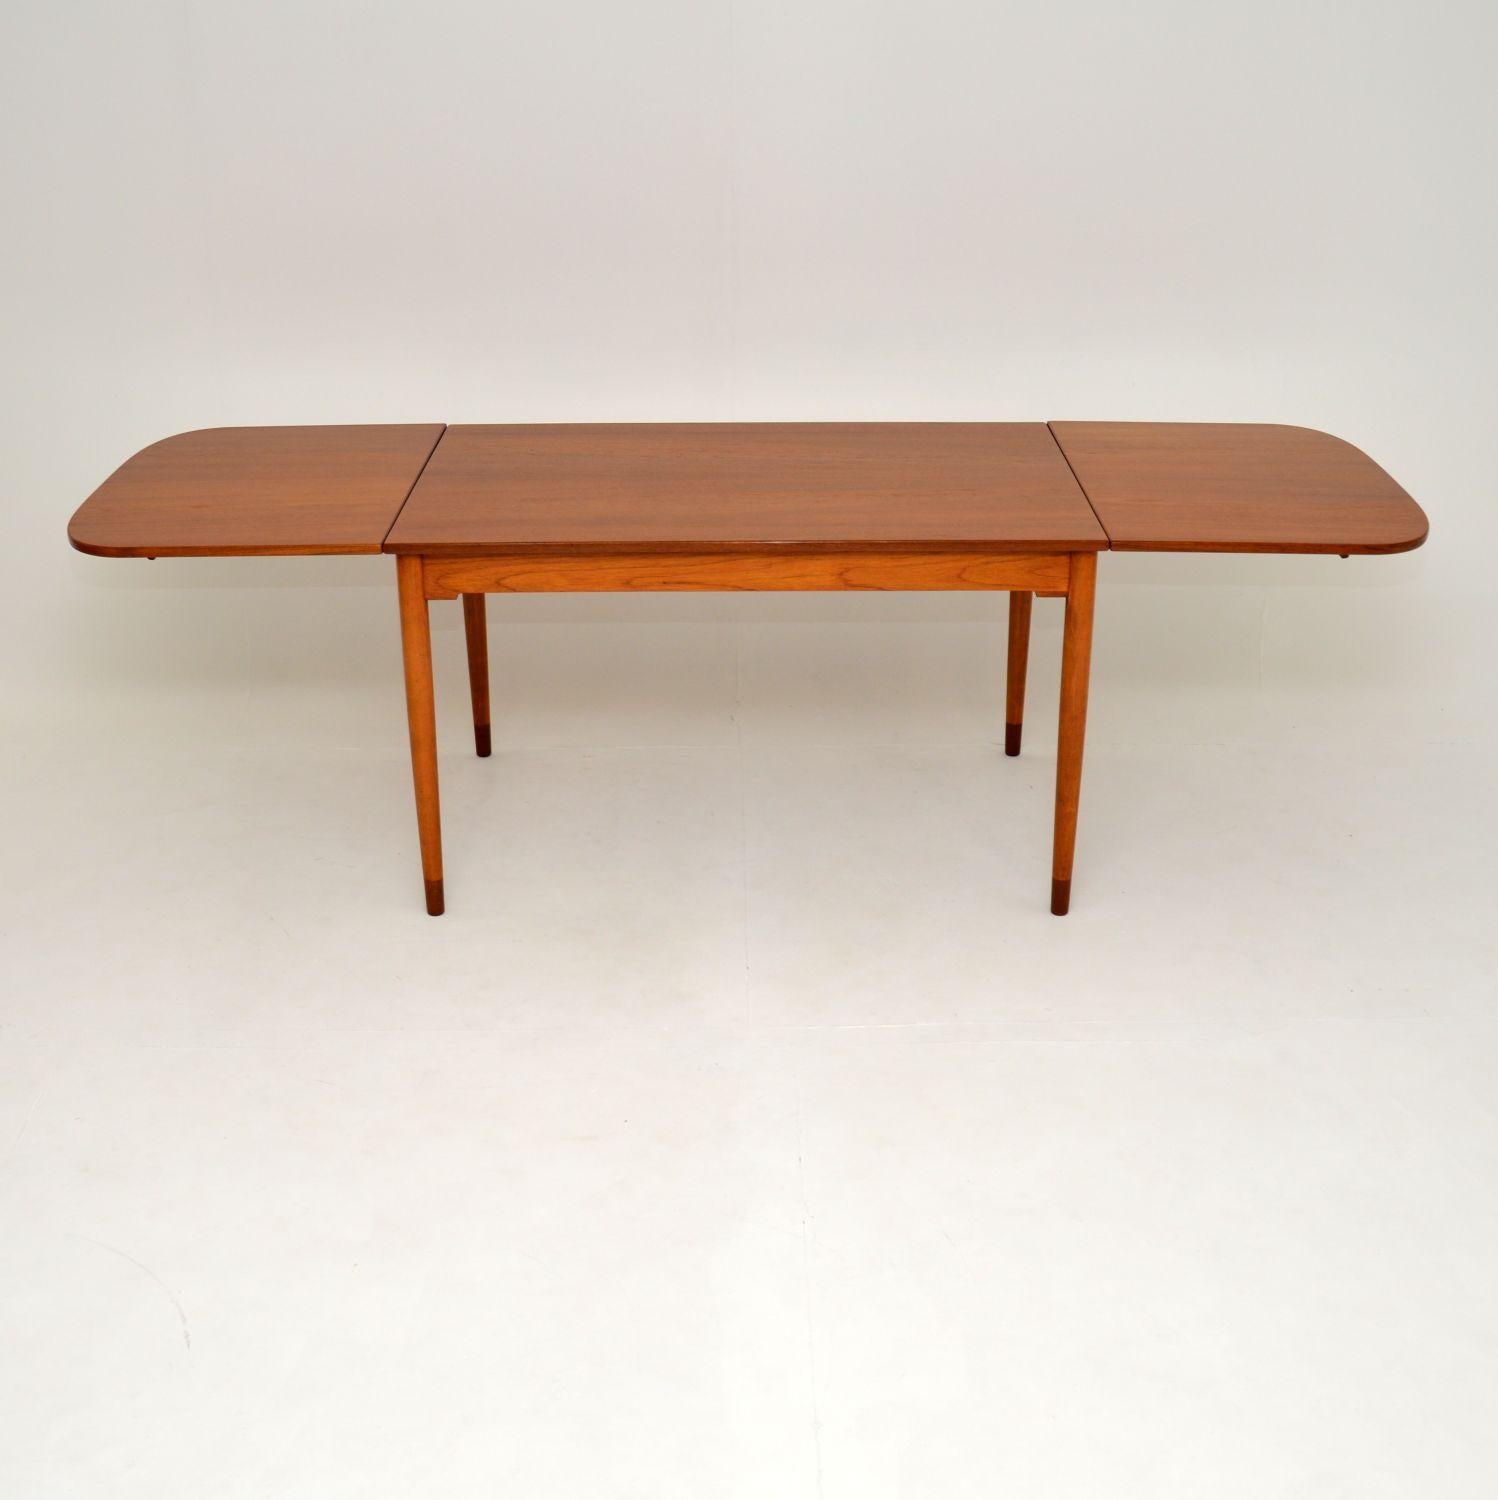 A stunning and rare vintage Danish drop leaf dining table in teak. This was designed by Borge Mogensen for Soborg Mobelfabrik, it dates from the 1960’s.

The design is fantastic, with two large drop down leaves that when lifted, extend this to an